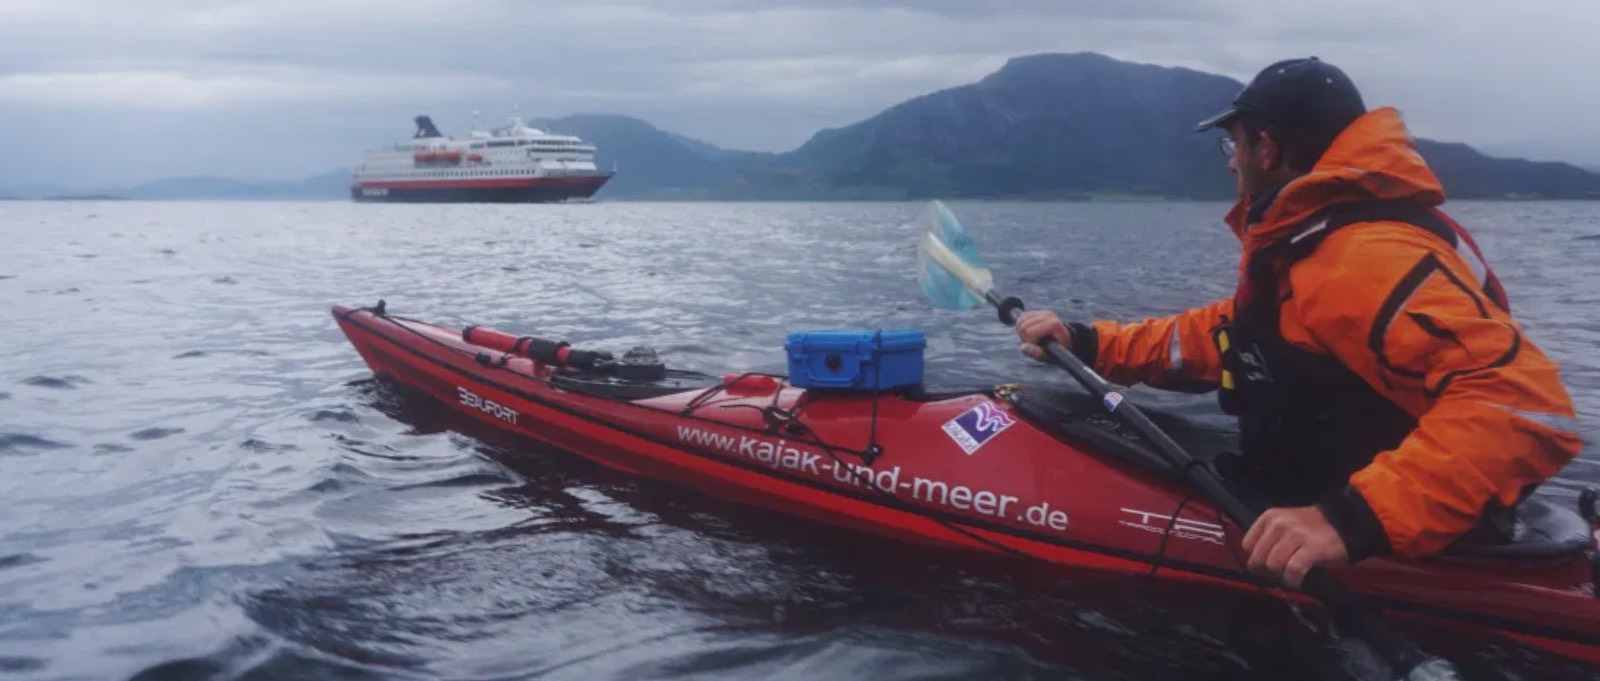 Sea Kayak paddling in a fjord with Hurtigruten cruise ship in the background.